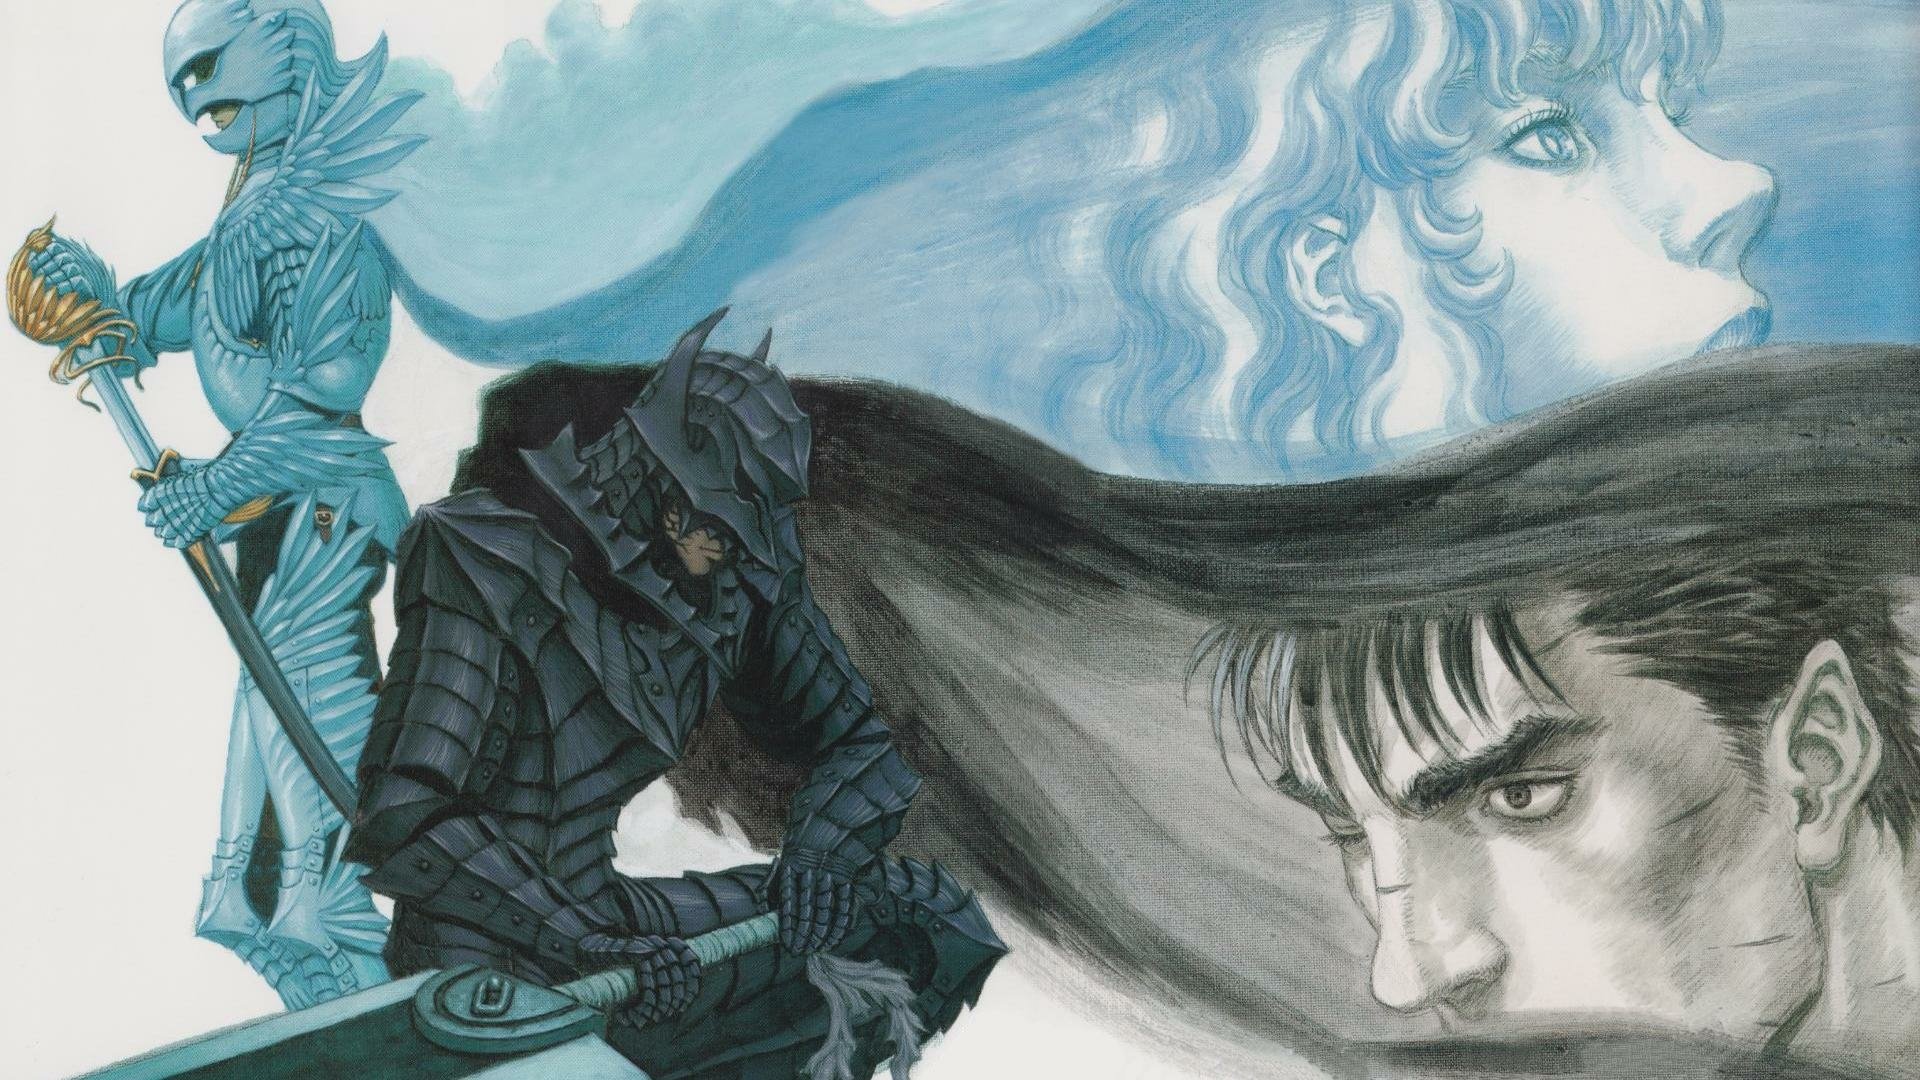 Download Guts and Griffith, lethal adversaries in the anime series Berserk  Wallpaper | Wallpapers.com